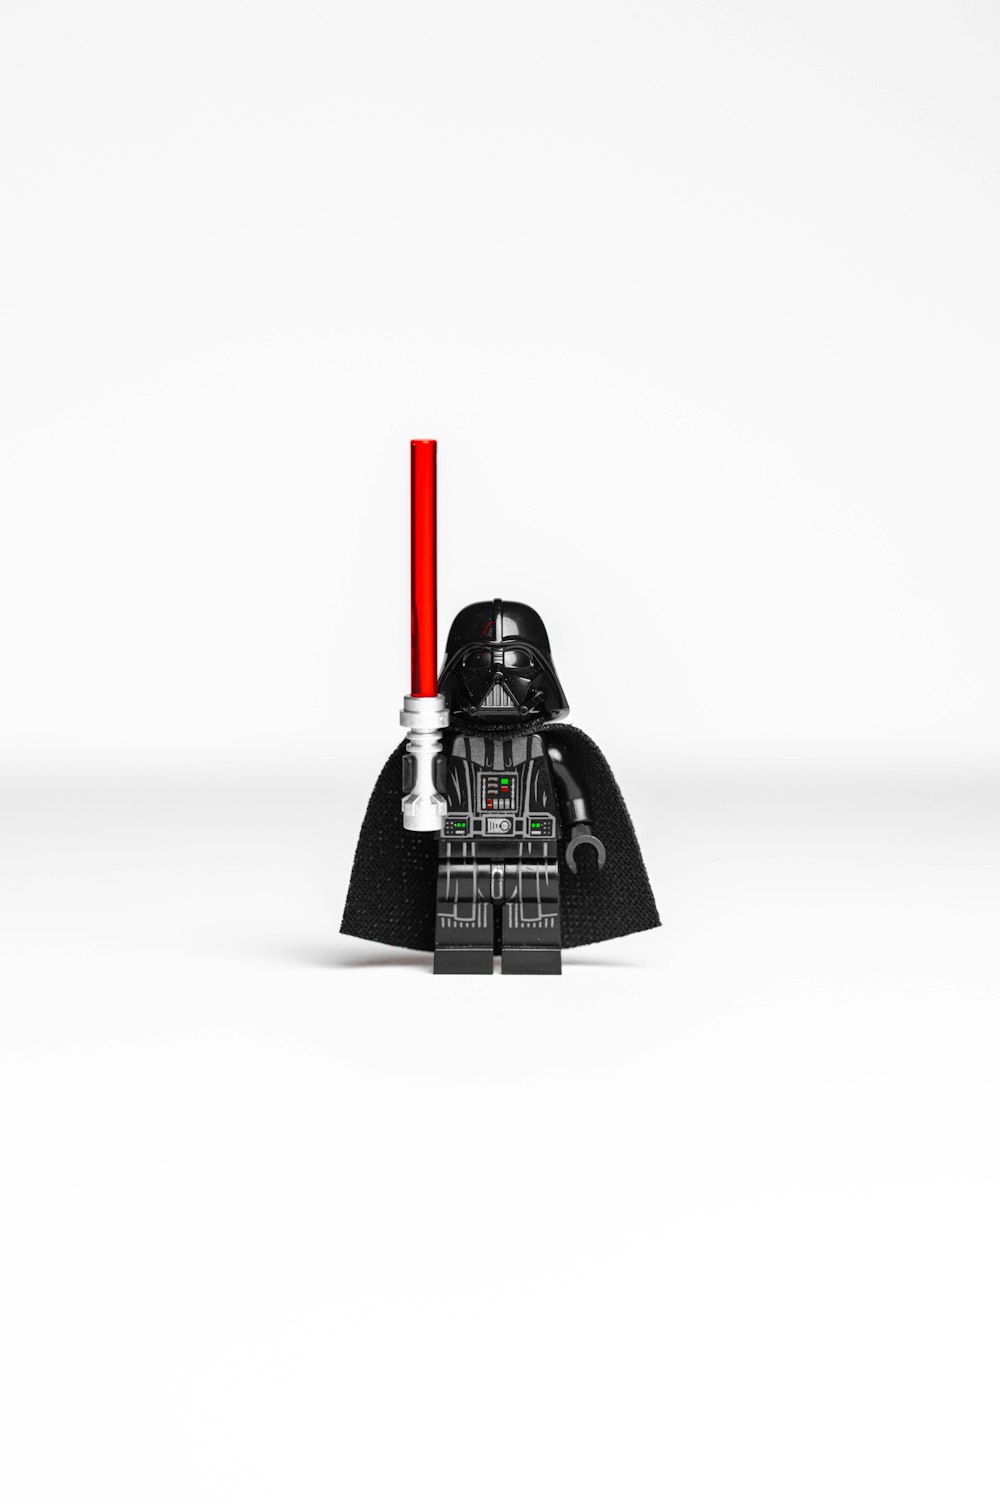 a lego darth vader with a red light on